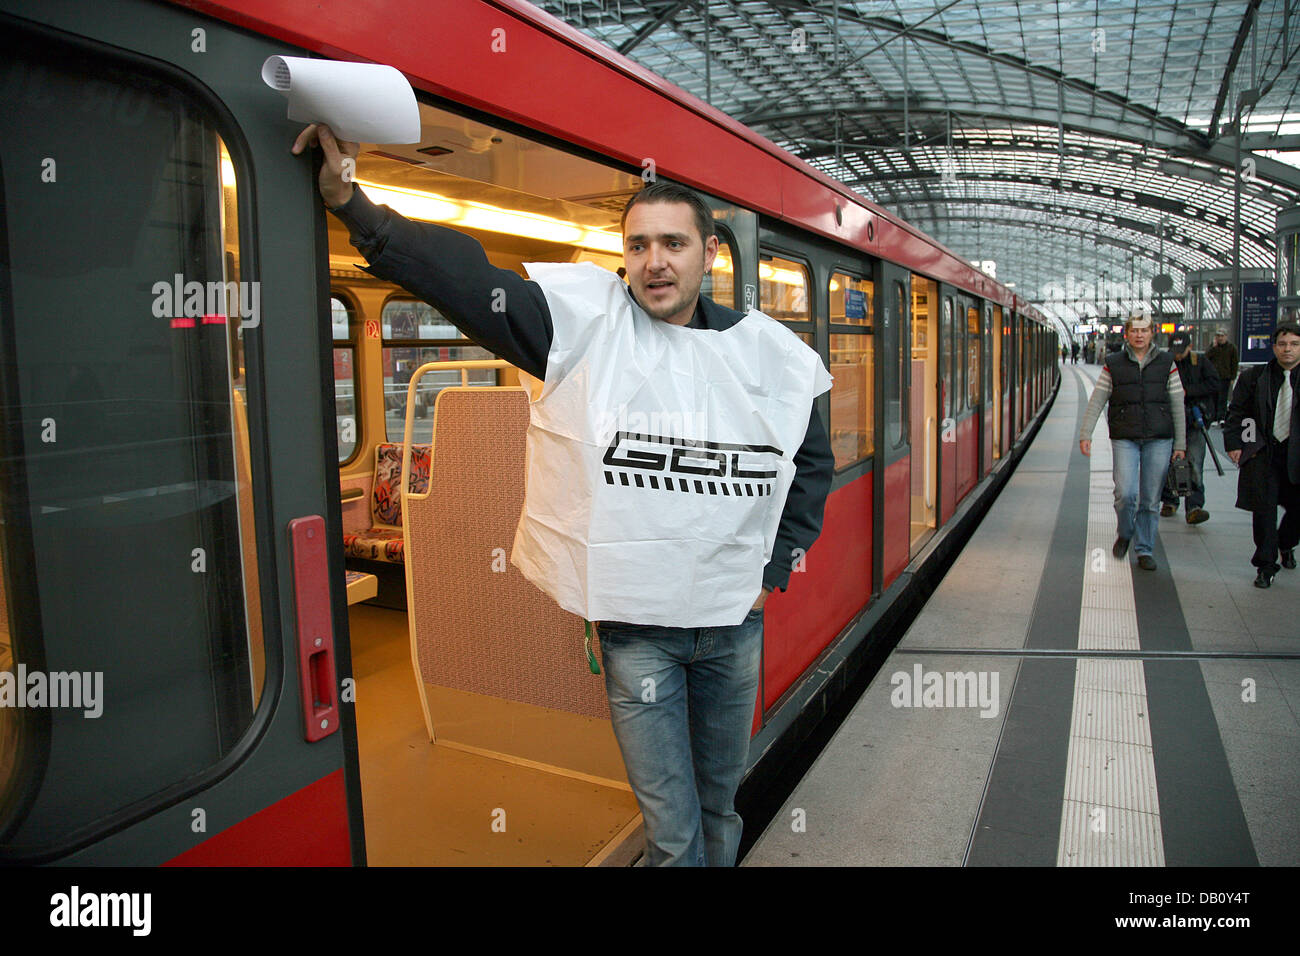 A member of the German trade-union present in train companies (GDL) informs people during the GDL strike at the main train station in Berlin, Germany, 05 October 2007. Trains run less frequent according to a substitute time table since early this morning due to the engine drivers' strike. A spokesperson of the German railways company 'Deutsche Bahn' (DB) assured customers in Berlin Stock Photo